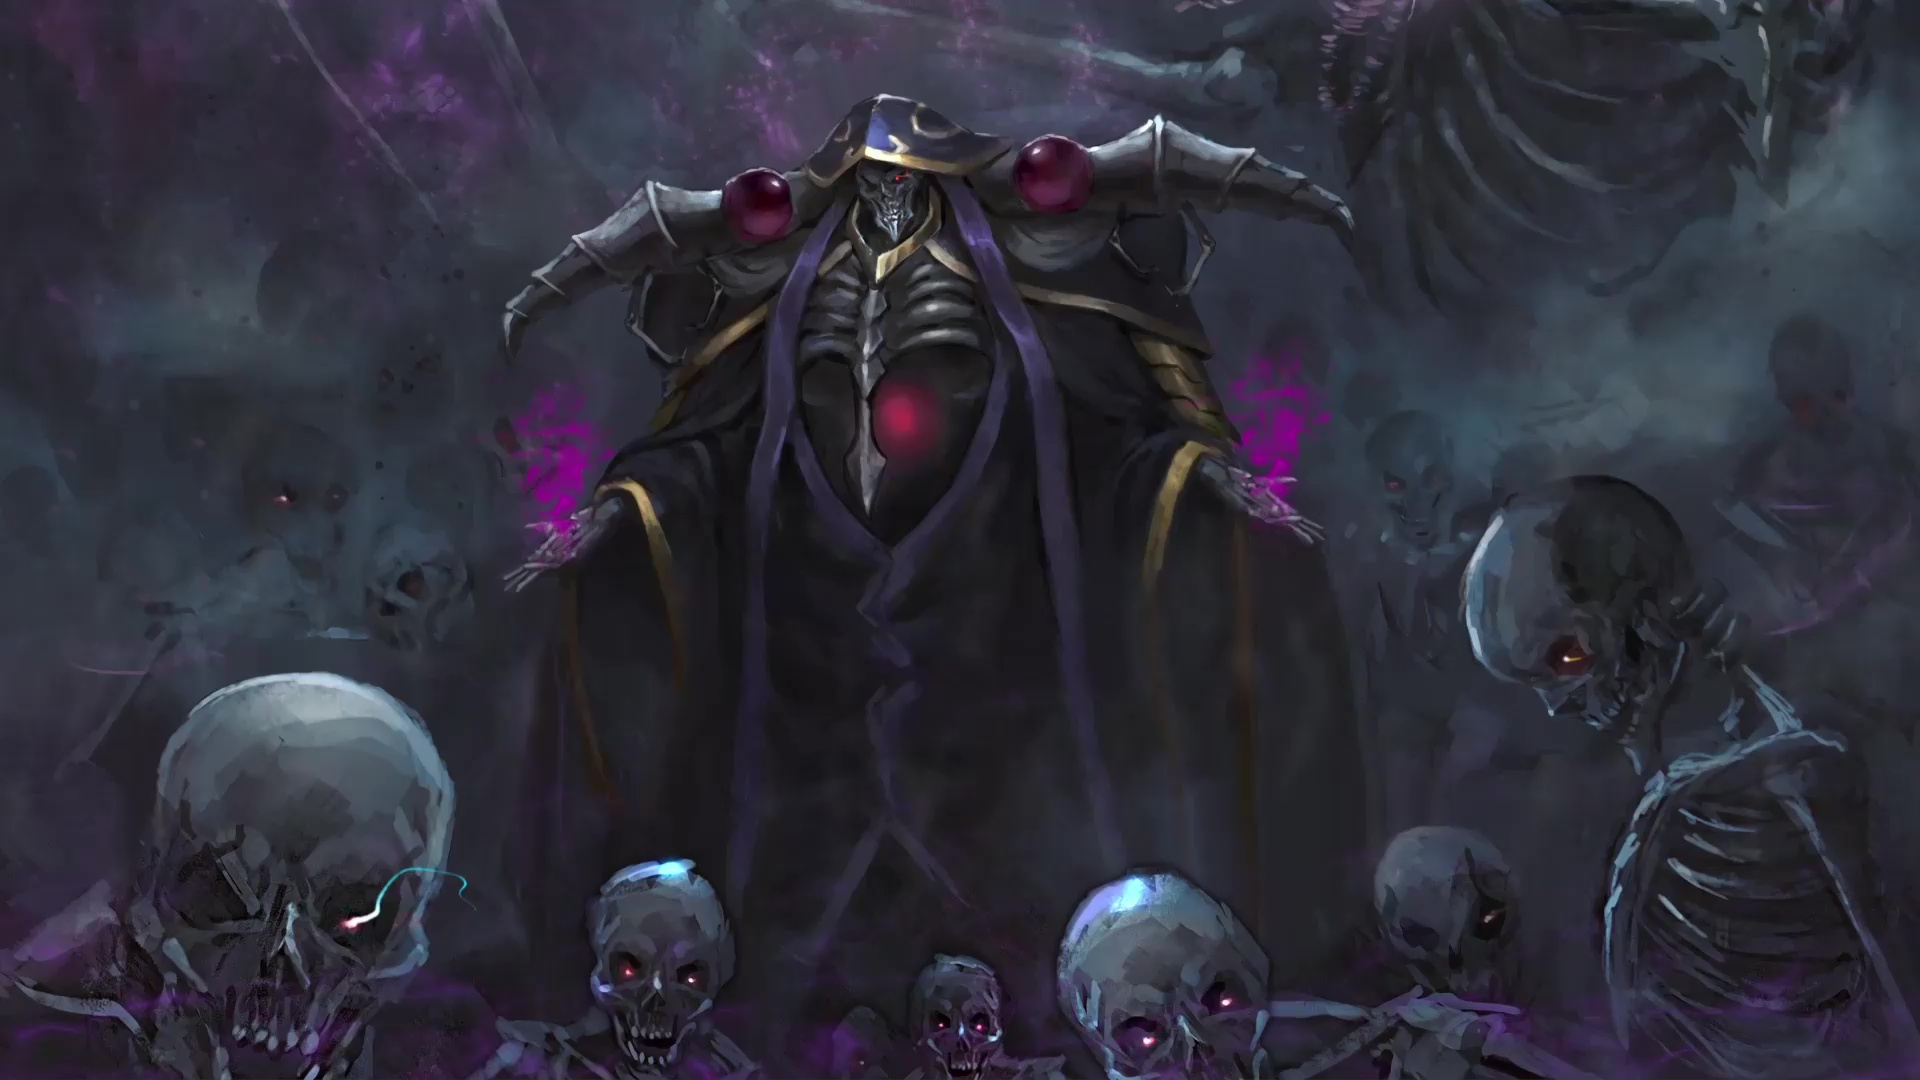 Download Death Knight Ainz Ooal Gown Wallpaper | Wallpapers.com